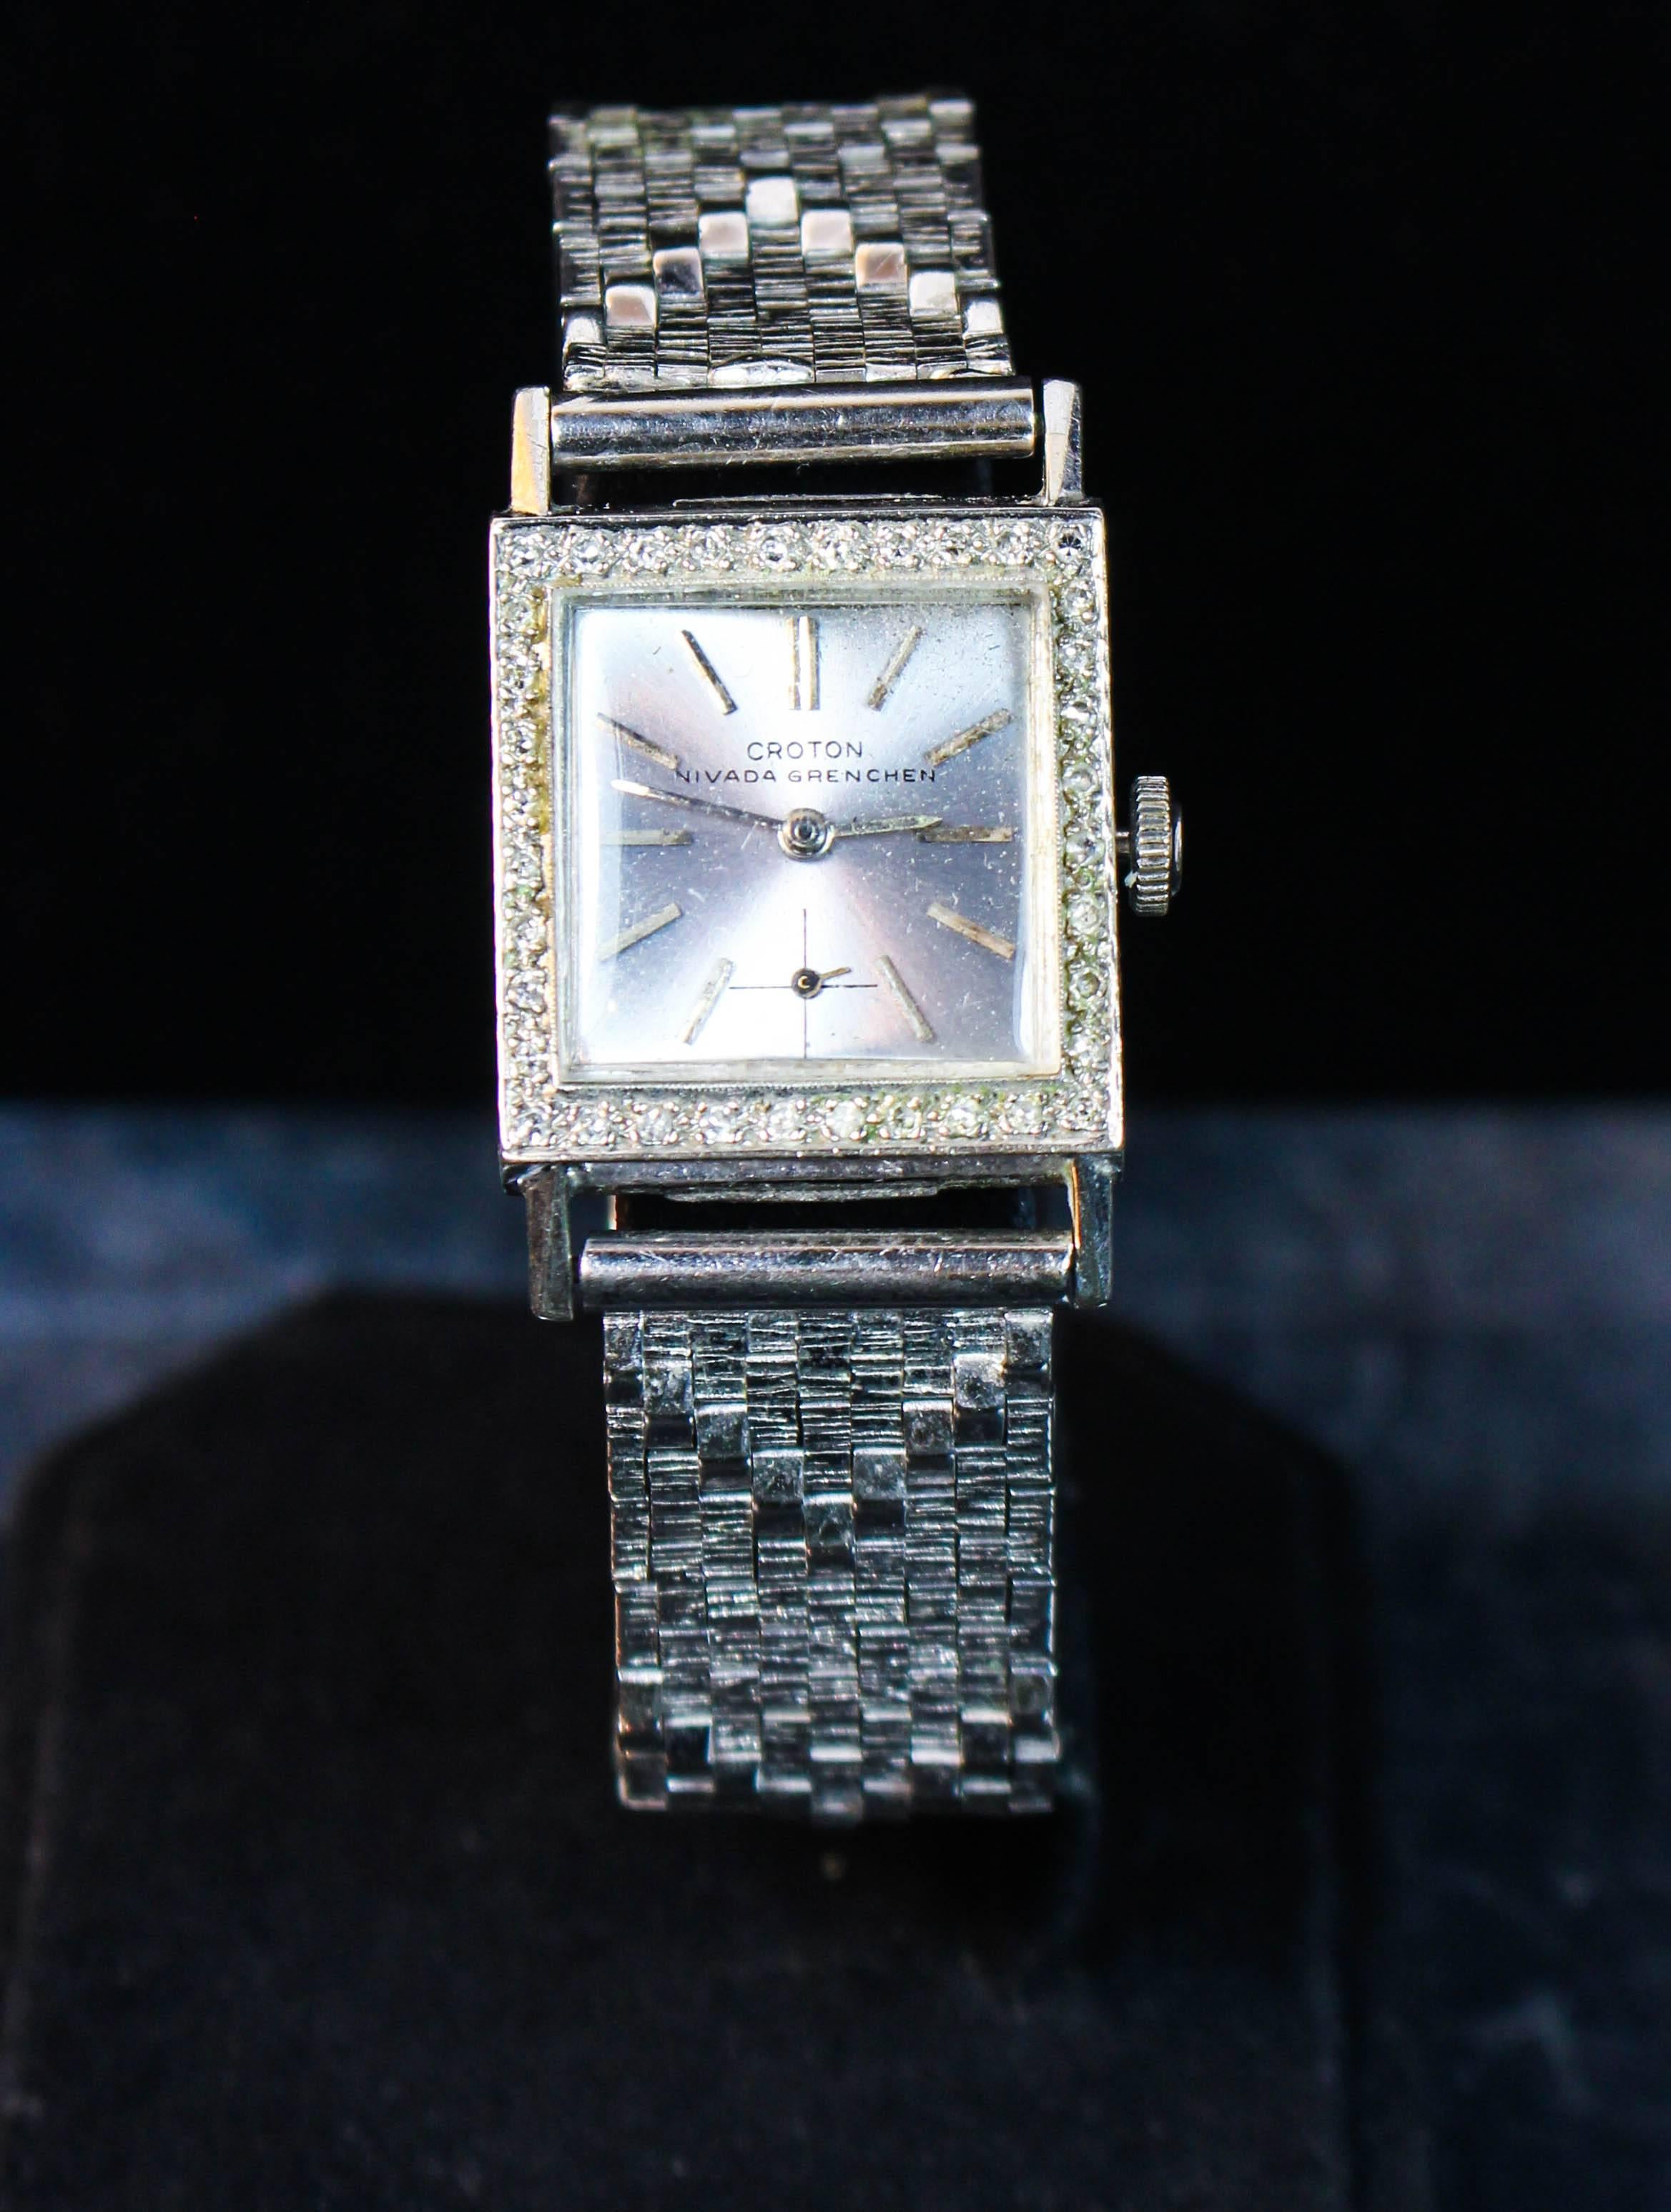 This Croton Nivada Grenchen watch is composed of 14kt white gold. Features woven patterned straps with a diamond pave face. There is an adjustable closure. In excellent condition.

Please feel free to ask any questions you may have, we are happy to